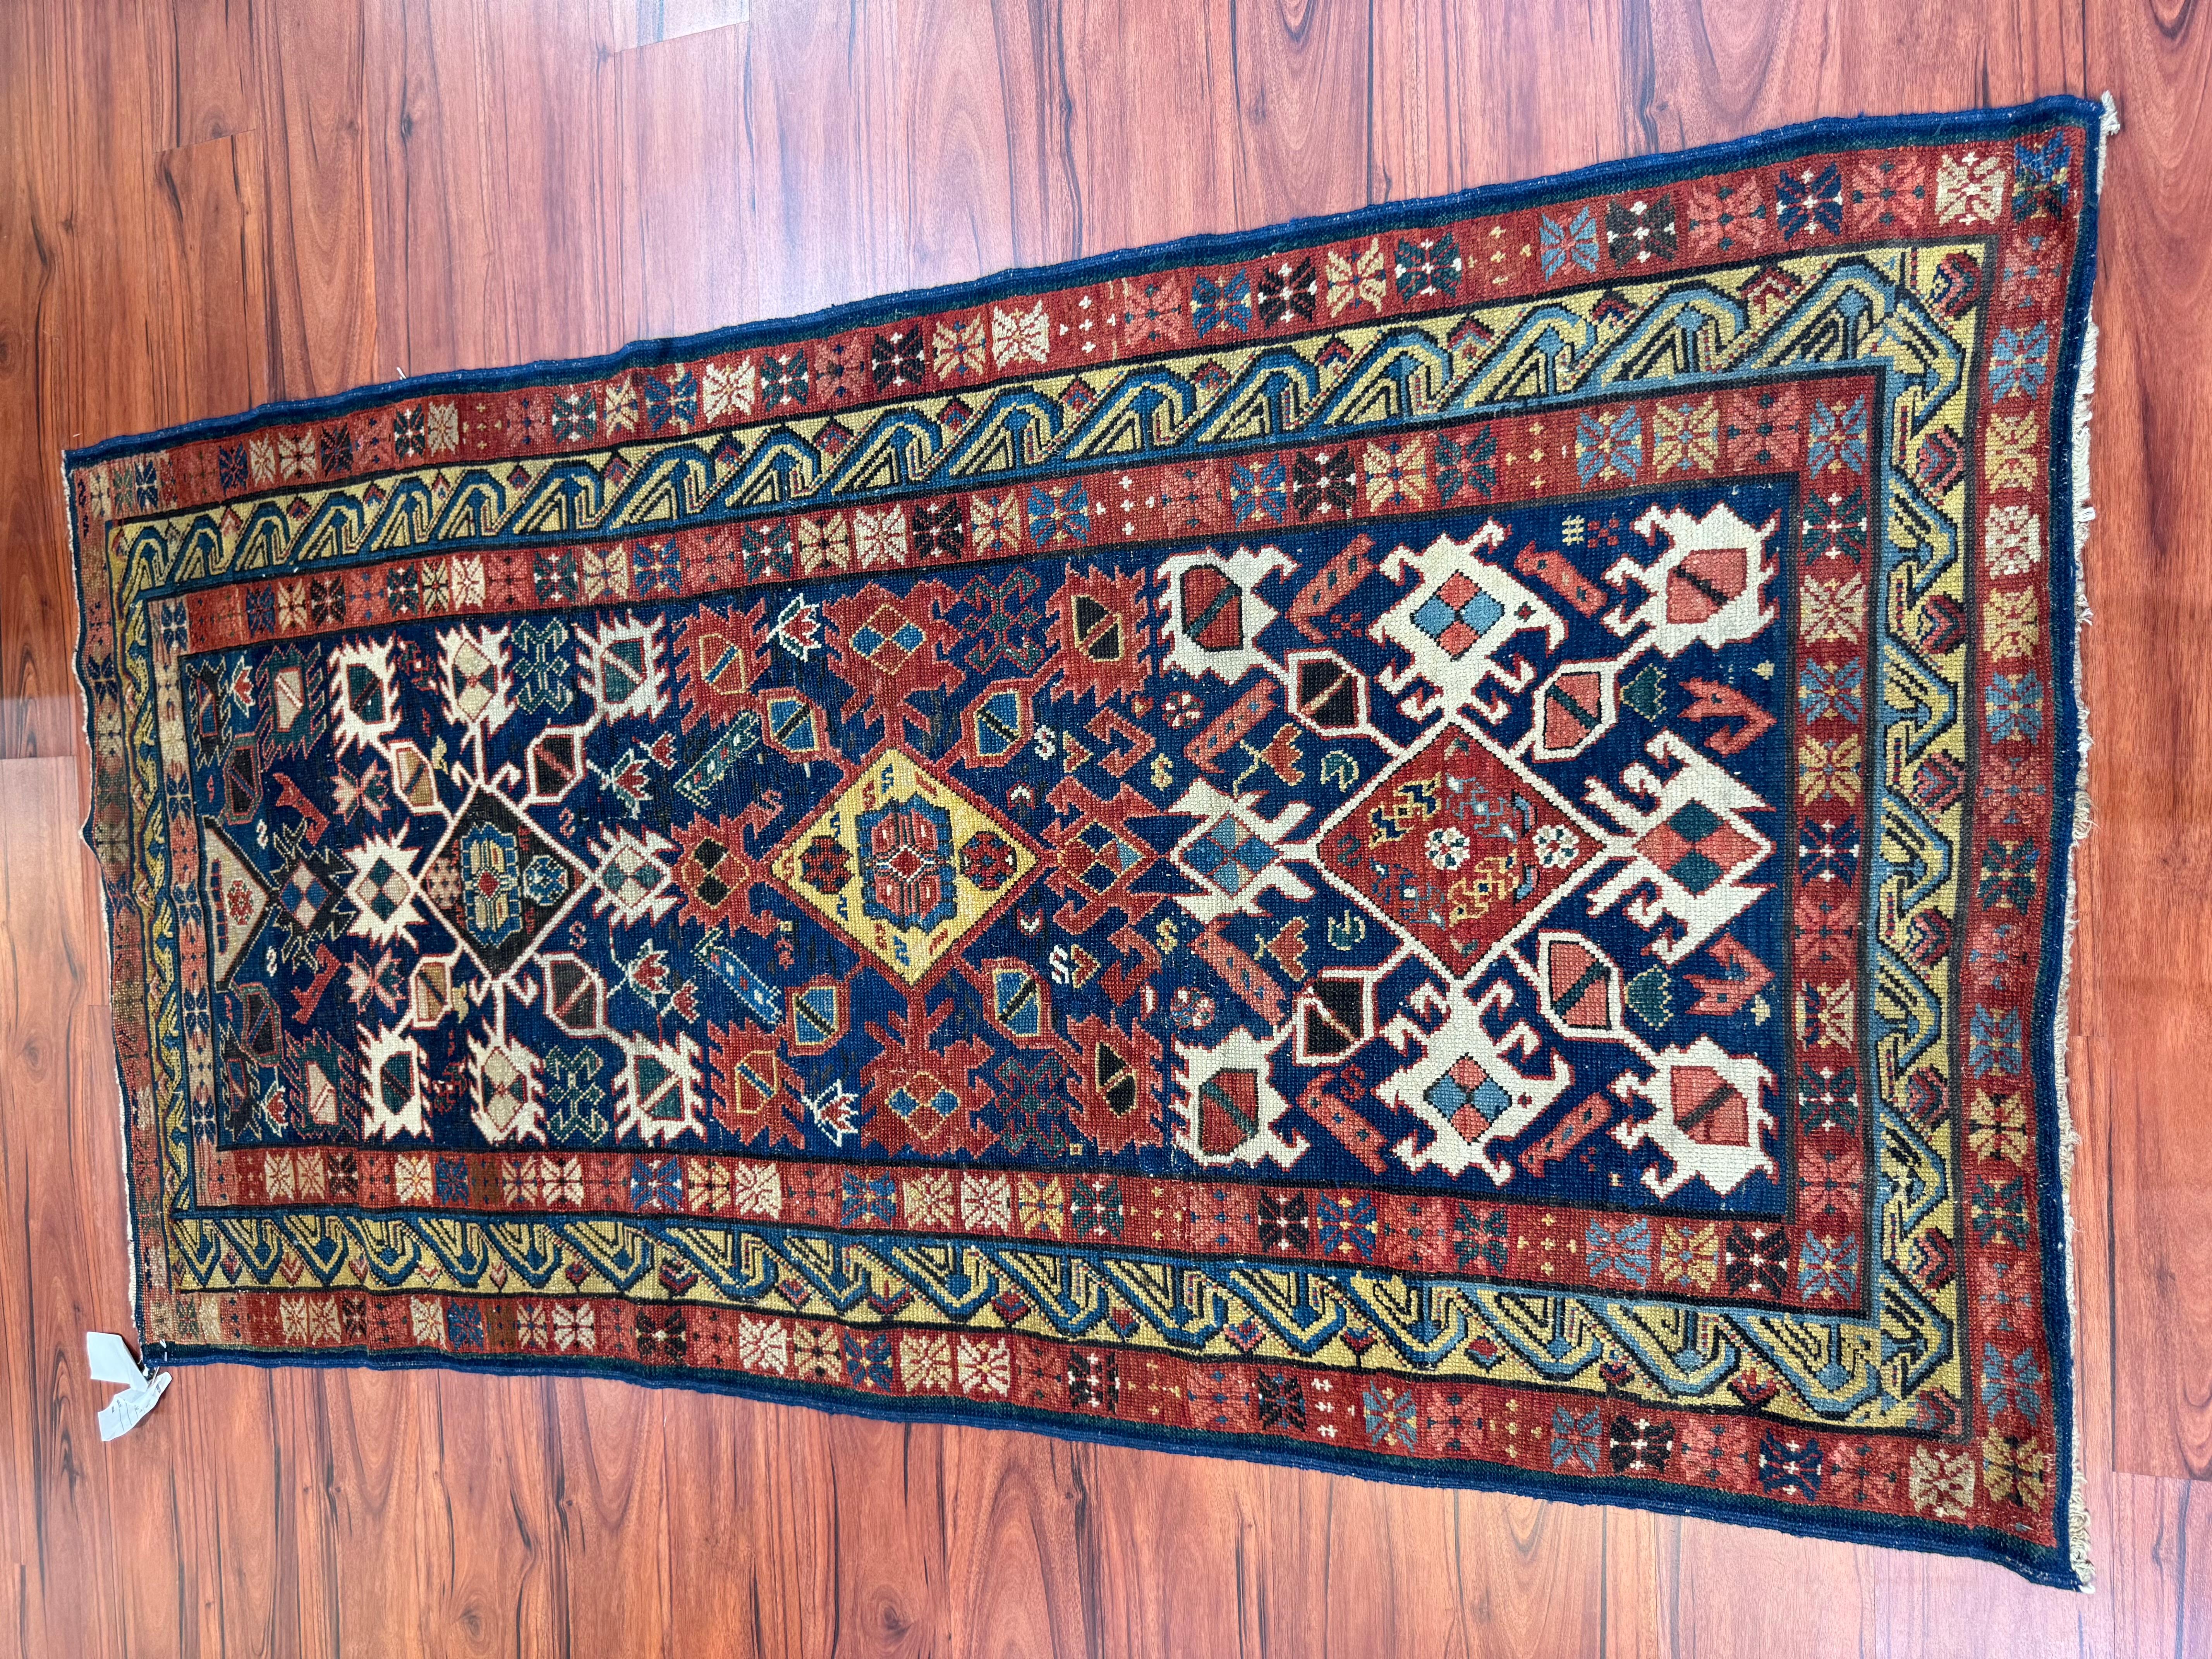 A stunning antique Seychour Caucasian rug that originates from Azerbaijan in the 19th century. This rug has a rich history and is in very good condition. Measurements are 3’5” by 6’4” ft. Feel free to message me about this listing or any other I